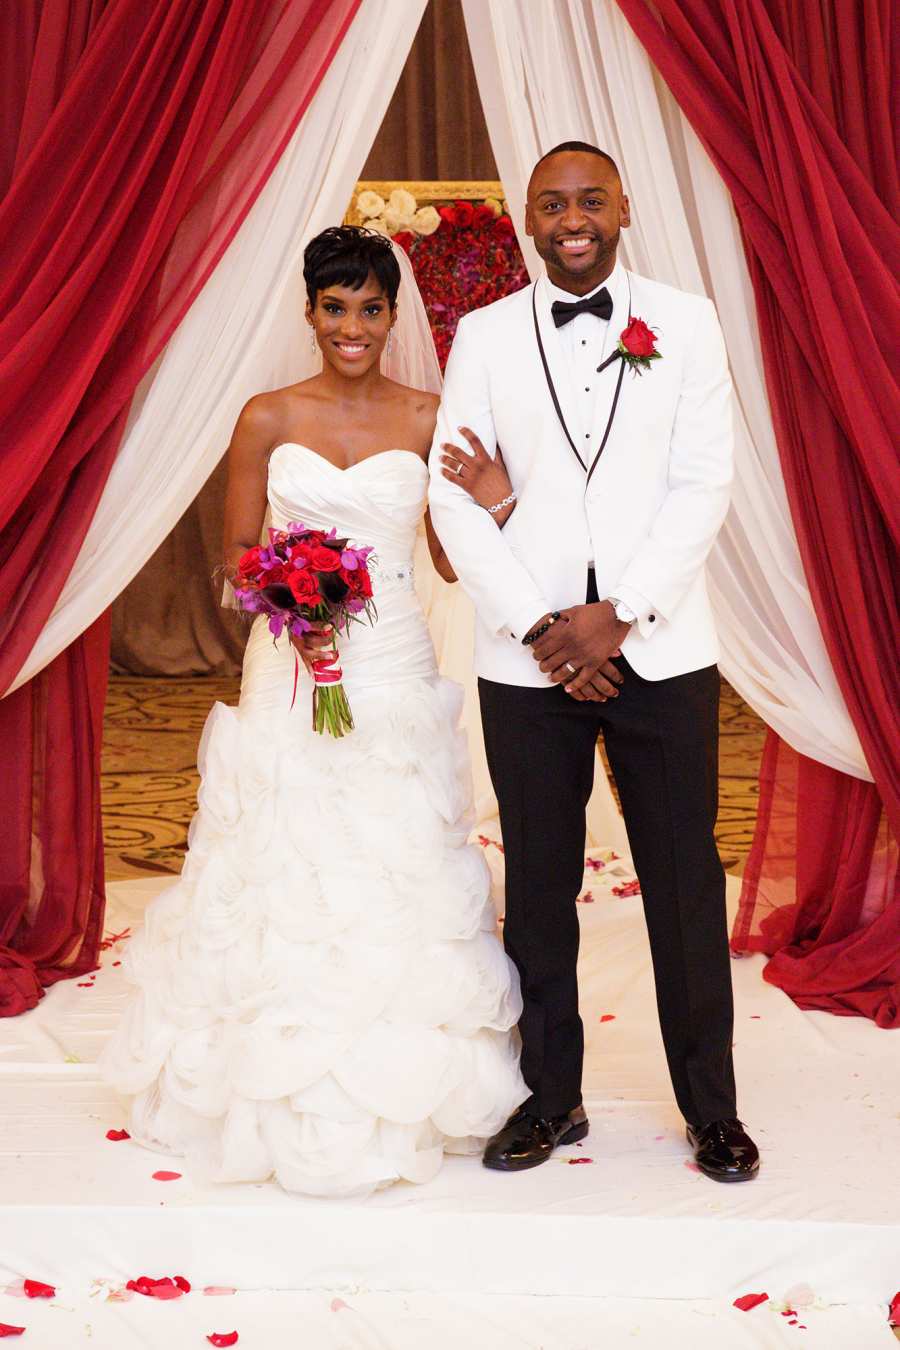 Sheila and Nate Married at First Sight Wildest Dating TV Shows